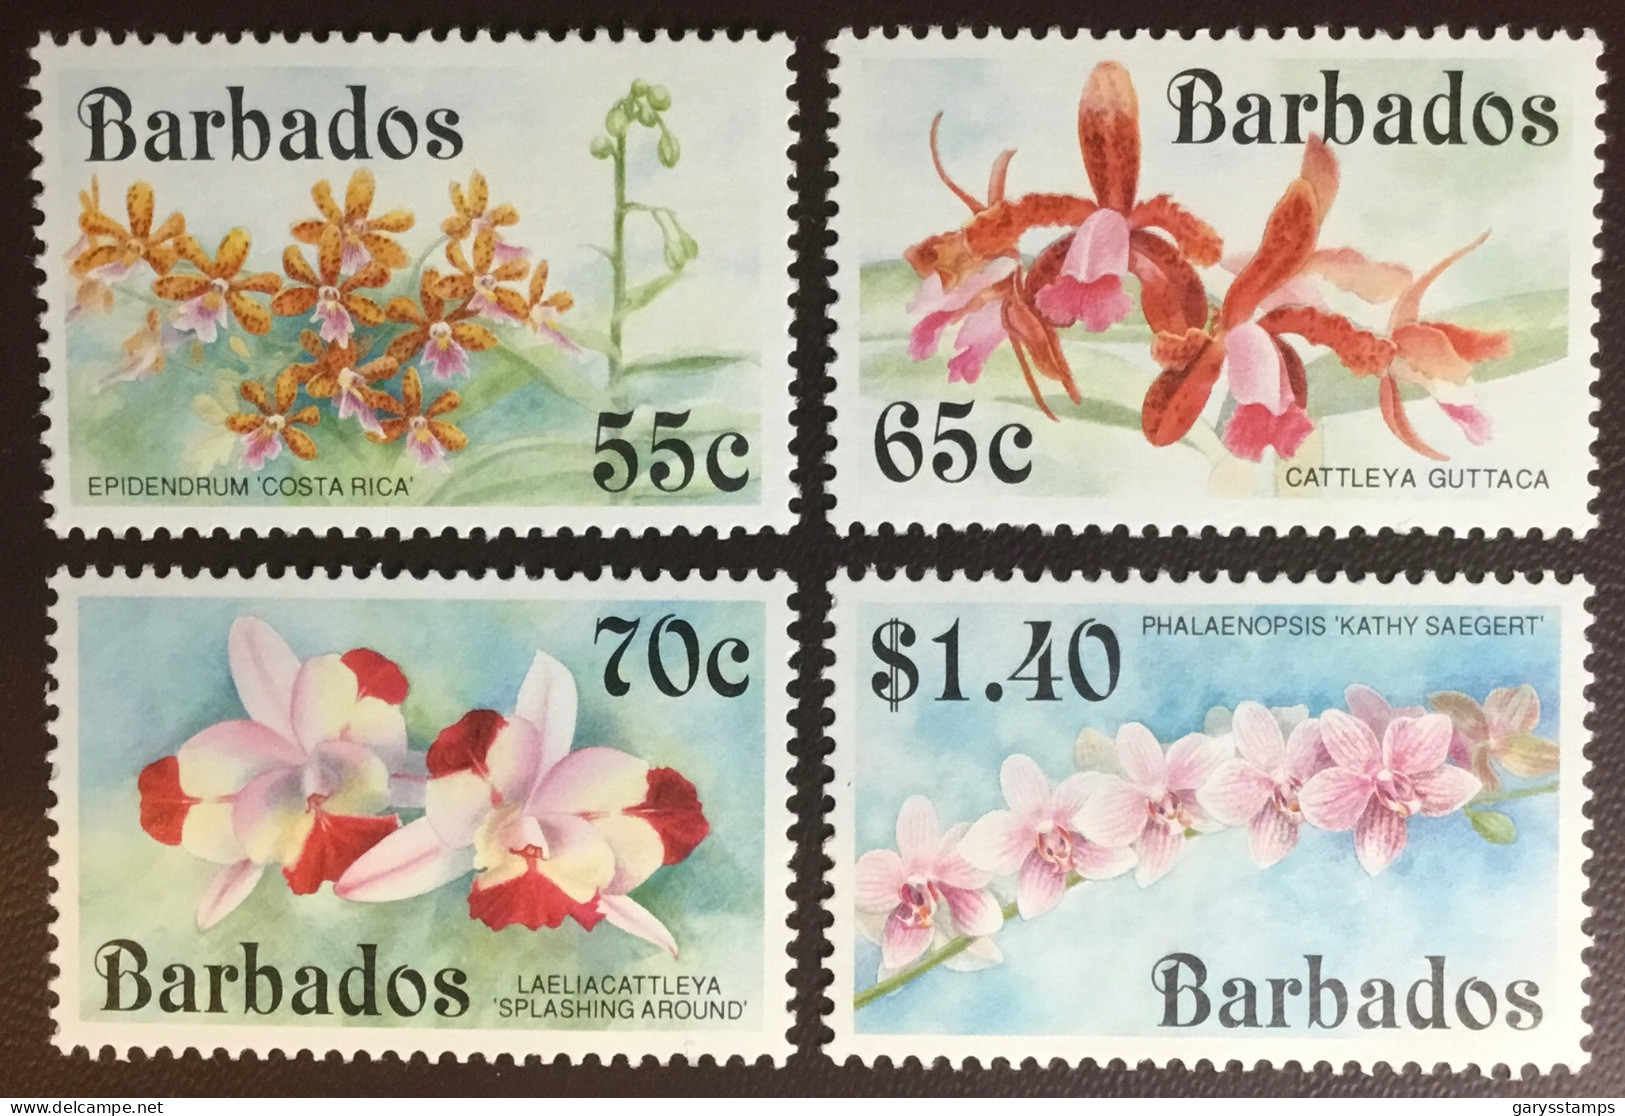 Barbados 1992 Orchids Flowers MNH - Orchideen